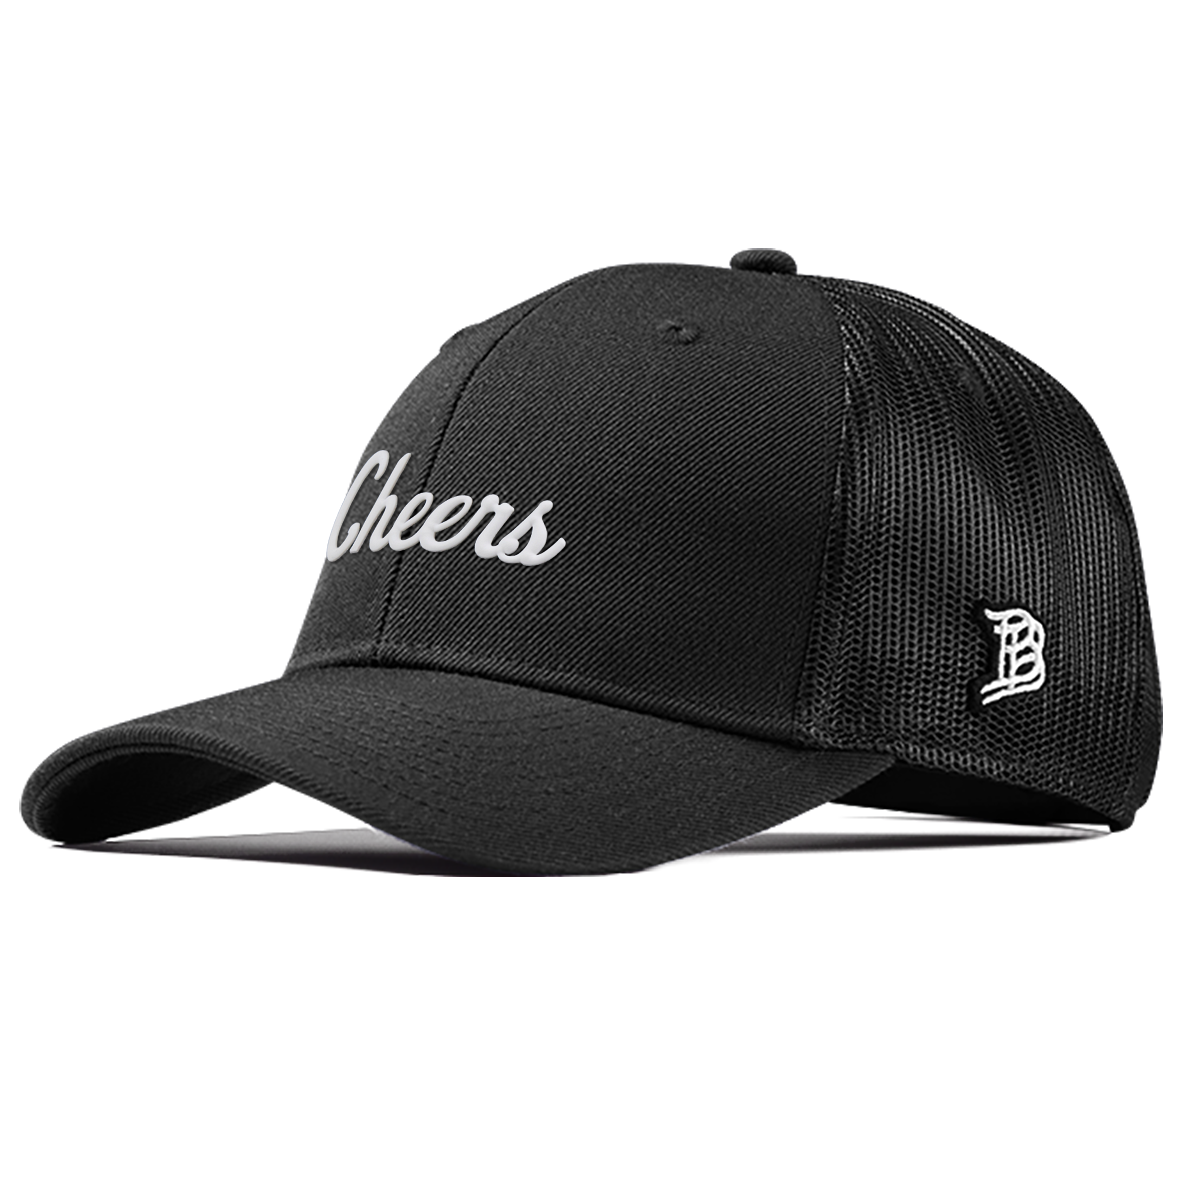 BB Cheers Curved Trucker